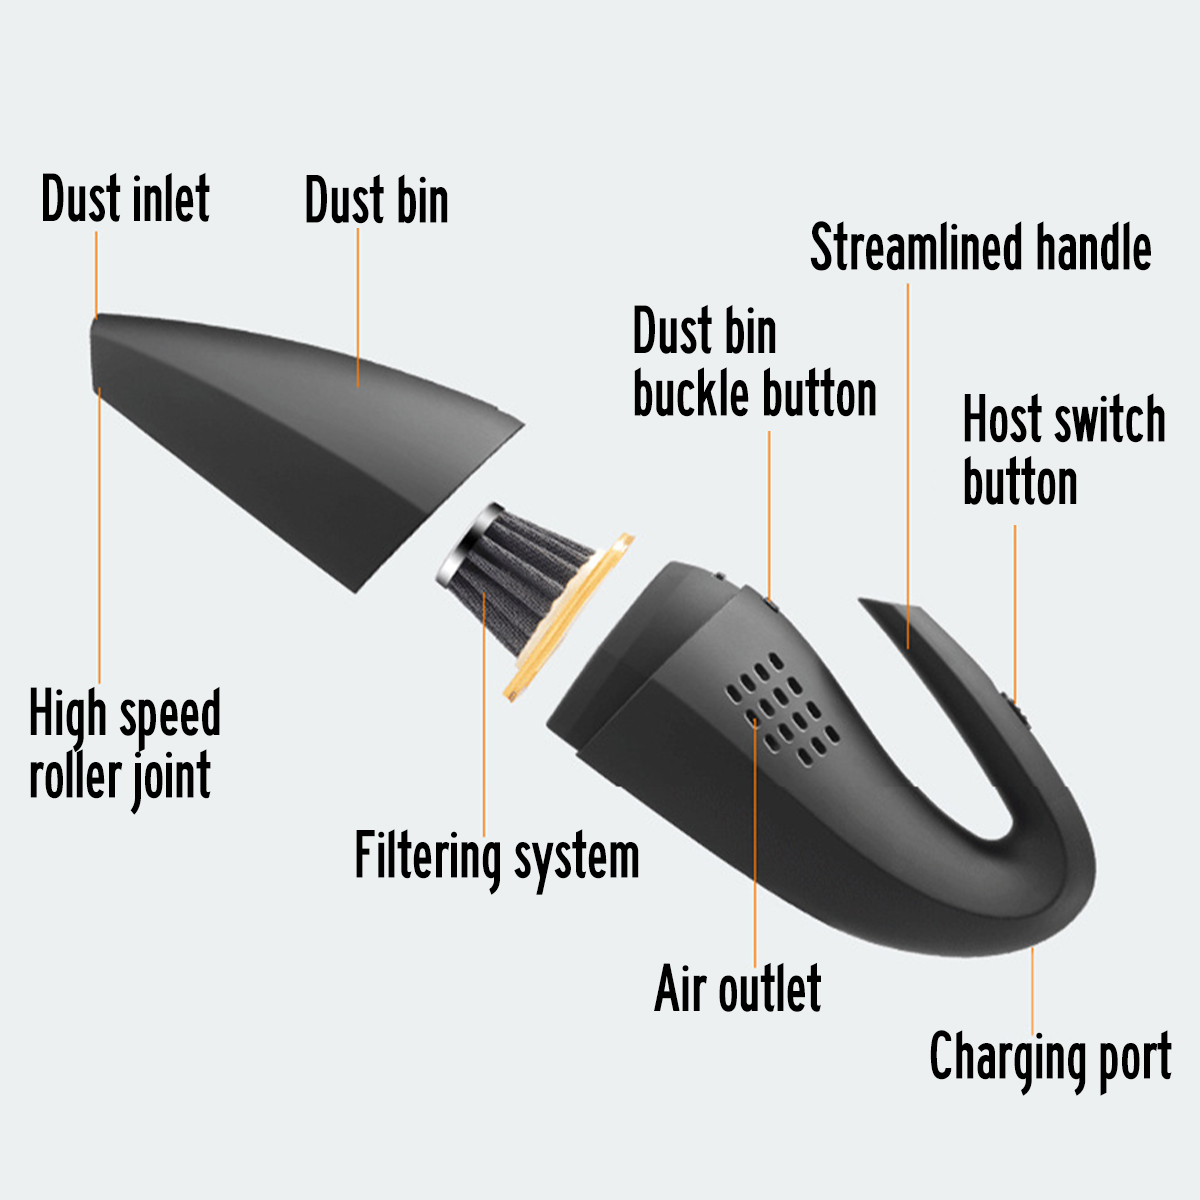 110-240V-120W-Handheld-Car-Wireless-Vacuum-Cleaner-With-High-Power-Dual-Purpose-Wet--Dry-Portable-Re-1581227-3